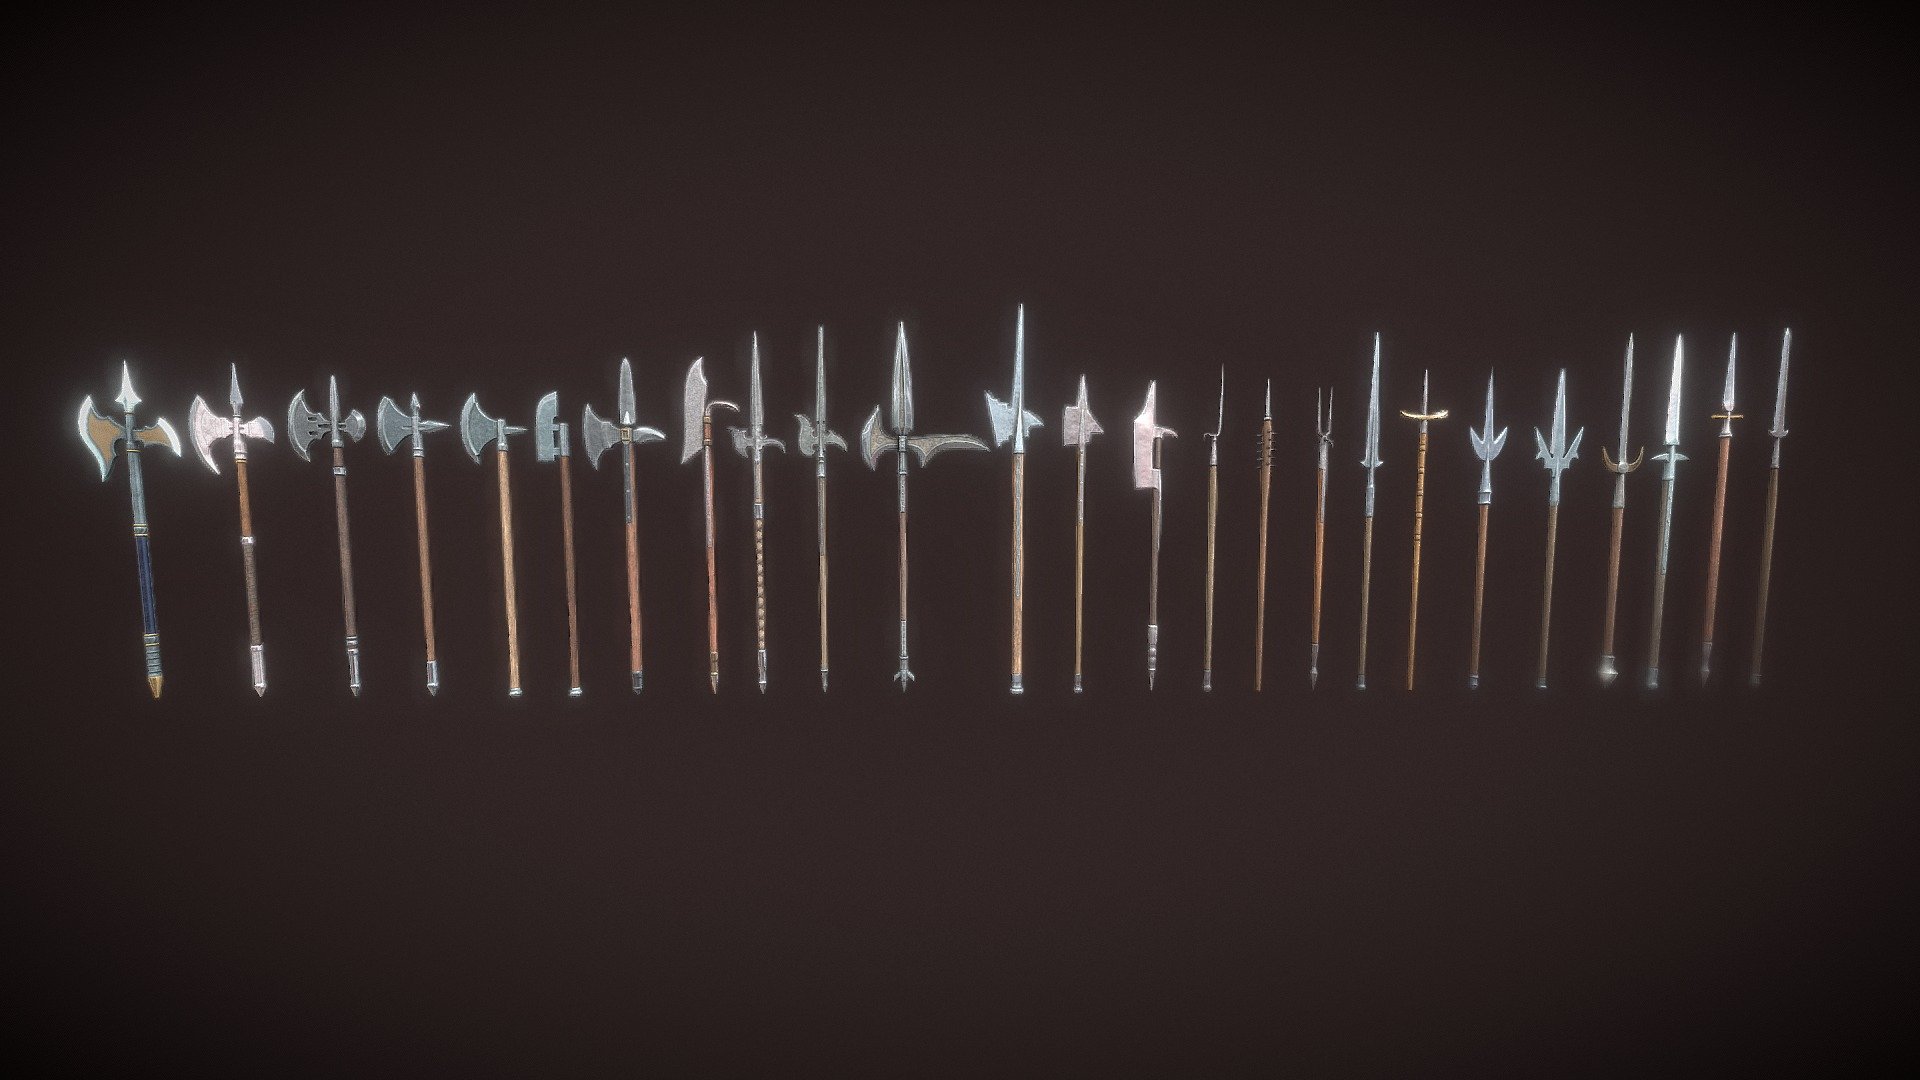 Qualitative models of halberds and spears.

The set consists of 25 objects (14 halberds and 11 spears).

Each object has PBR textures with a resolution of 2048x2048.

The total number of triangles is 31822

Halberd_01 - 2708 tris

Halberd_02 - 1730 tris

Halberd_03 - 1822 tris

Halberd_04 - 1034 tris

Halberd_05 - 708 tris

Halberd_06 - 472 tris

Halberd_07 - 1800 tris

Halberd_08 - 1140 tris

Halberd_09 - 2186 tris

Halberd_10 - 2430 tris

Halberd_11 - 1346 tris

Halberd_12 - 1556 tris

Halberd_13 - 994 tris

Halberd_14 - 1112 tris

Lanse_01 - 884 tris

Lanse_02 - 740 tris

Lanse_03 - 796 tris

Lanse_04 - 828 tris

Lanse_05 - 760 tris

Lanse_06 - 1064 tris

Lanse_07 - 1056 tris

Lanse_08 - 988 tris

Lanse_09 - 860 tris

Lanse_10 - 972 tris

Lanse_11 - 876 tris

Archives with textures contain:

PNG textures - base color, metallic, normal, roughness

Texturing Unity  - AlbedoTransparency, MetallicSmoothness, Normal

Texturing Unreal Engine - BaseColor, Normal, OcclusionRoughnessMetallic - Halberds and spears - 3D model by zilbeerman 3d model